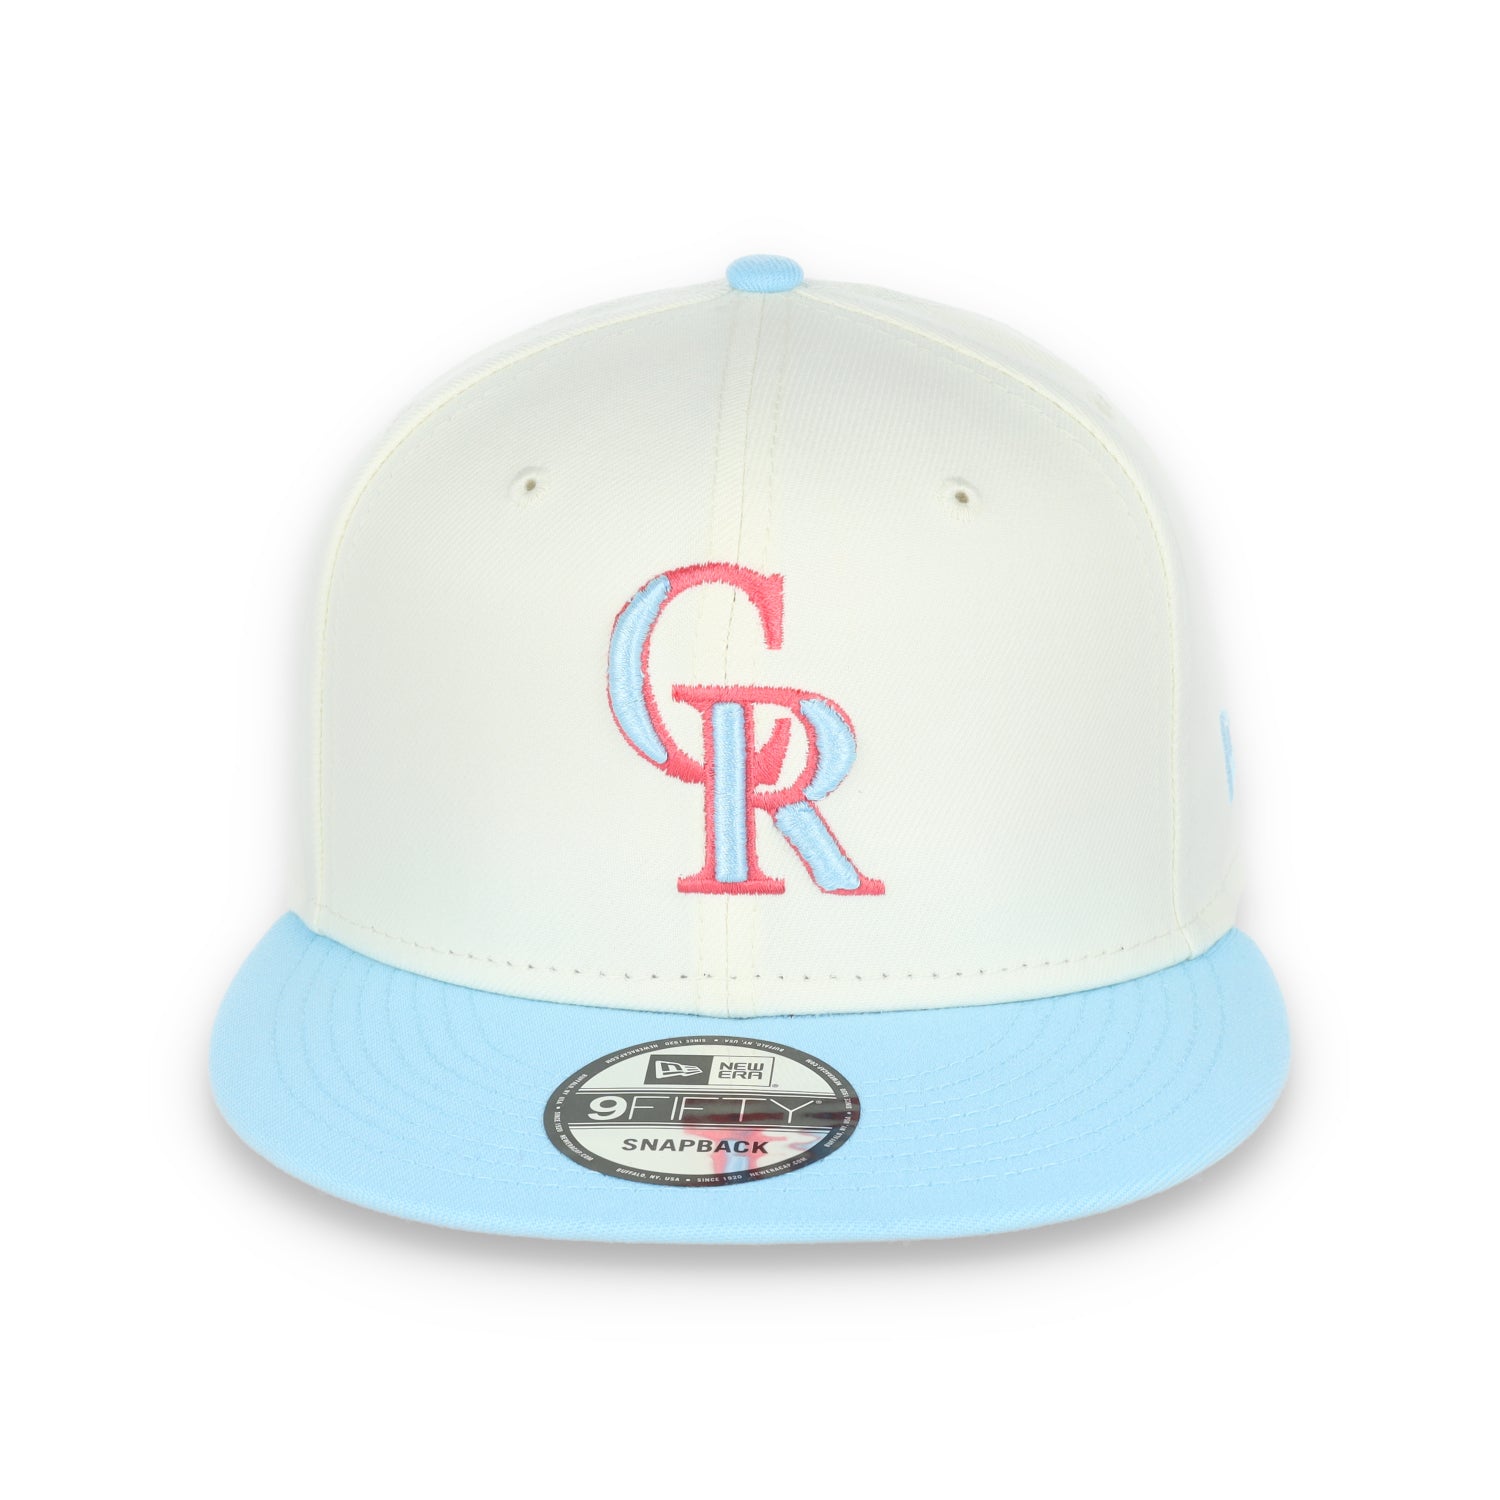 New Era Colorado Rockies 2-Tone Color Pack 9FIFTY Snapback Hat- Chrome/Baby Blue